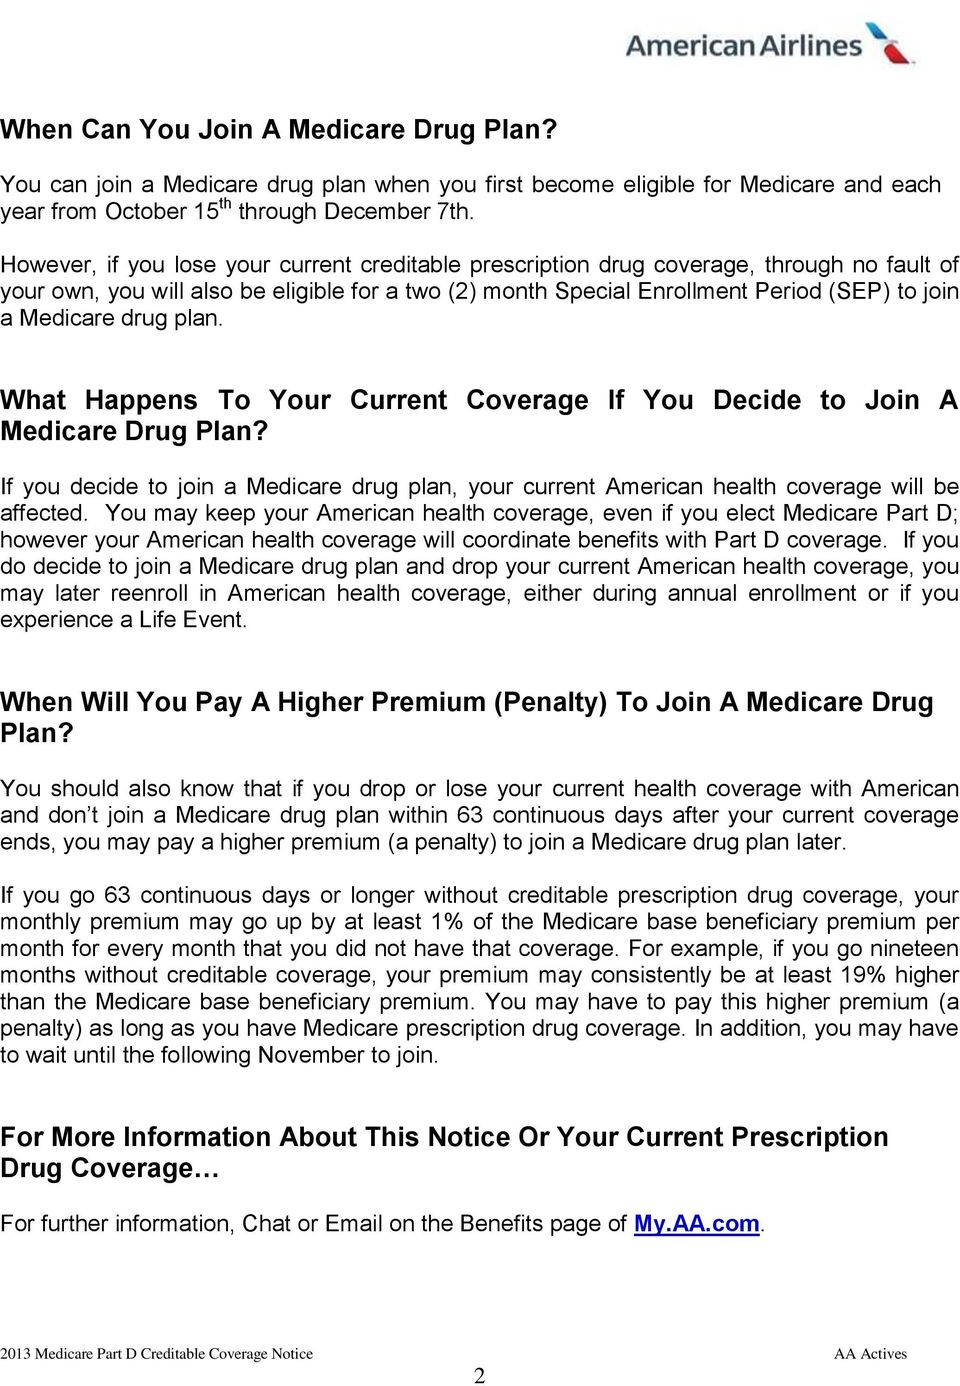 drug plan. What Happens To Your Current Coverage If You Decide to Join A Medicare Drug Plan? If you decide to join a Medicare drug plan, your current American health coverage will be affected.